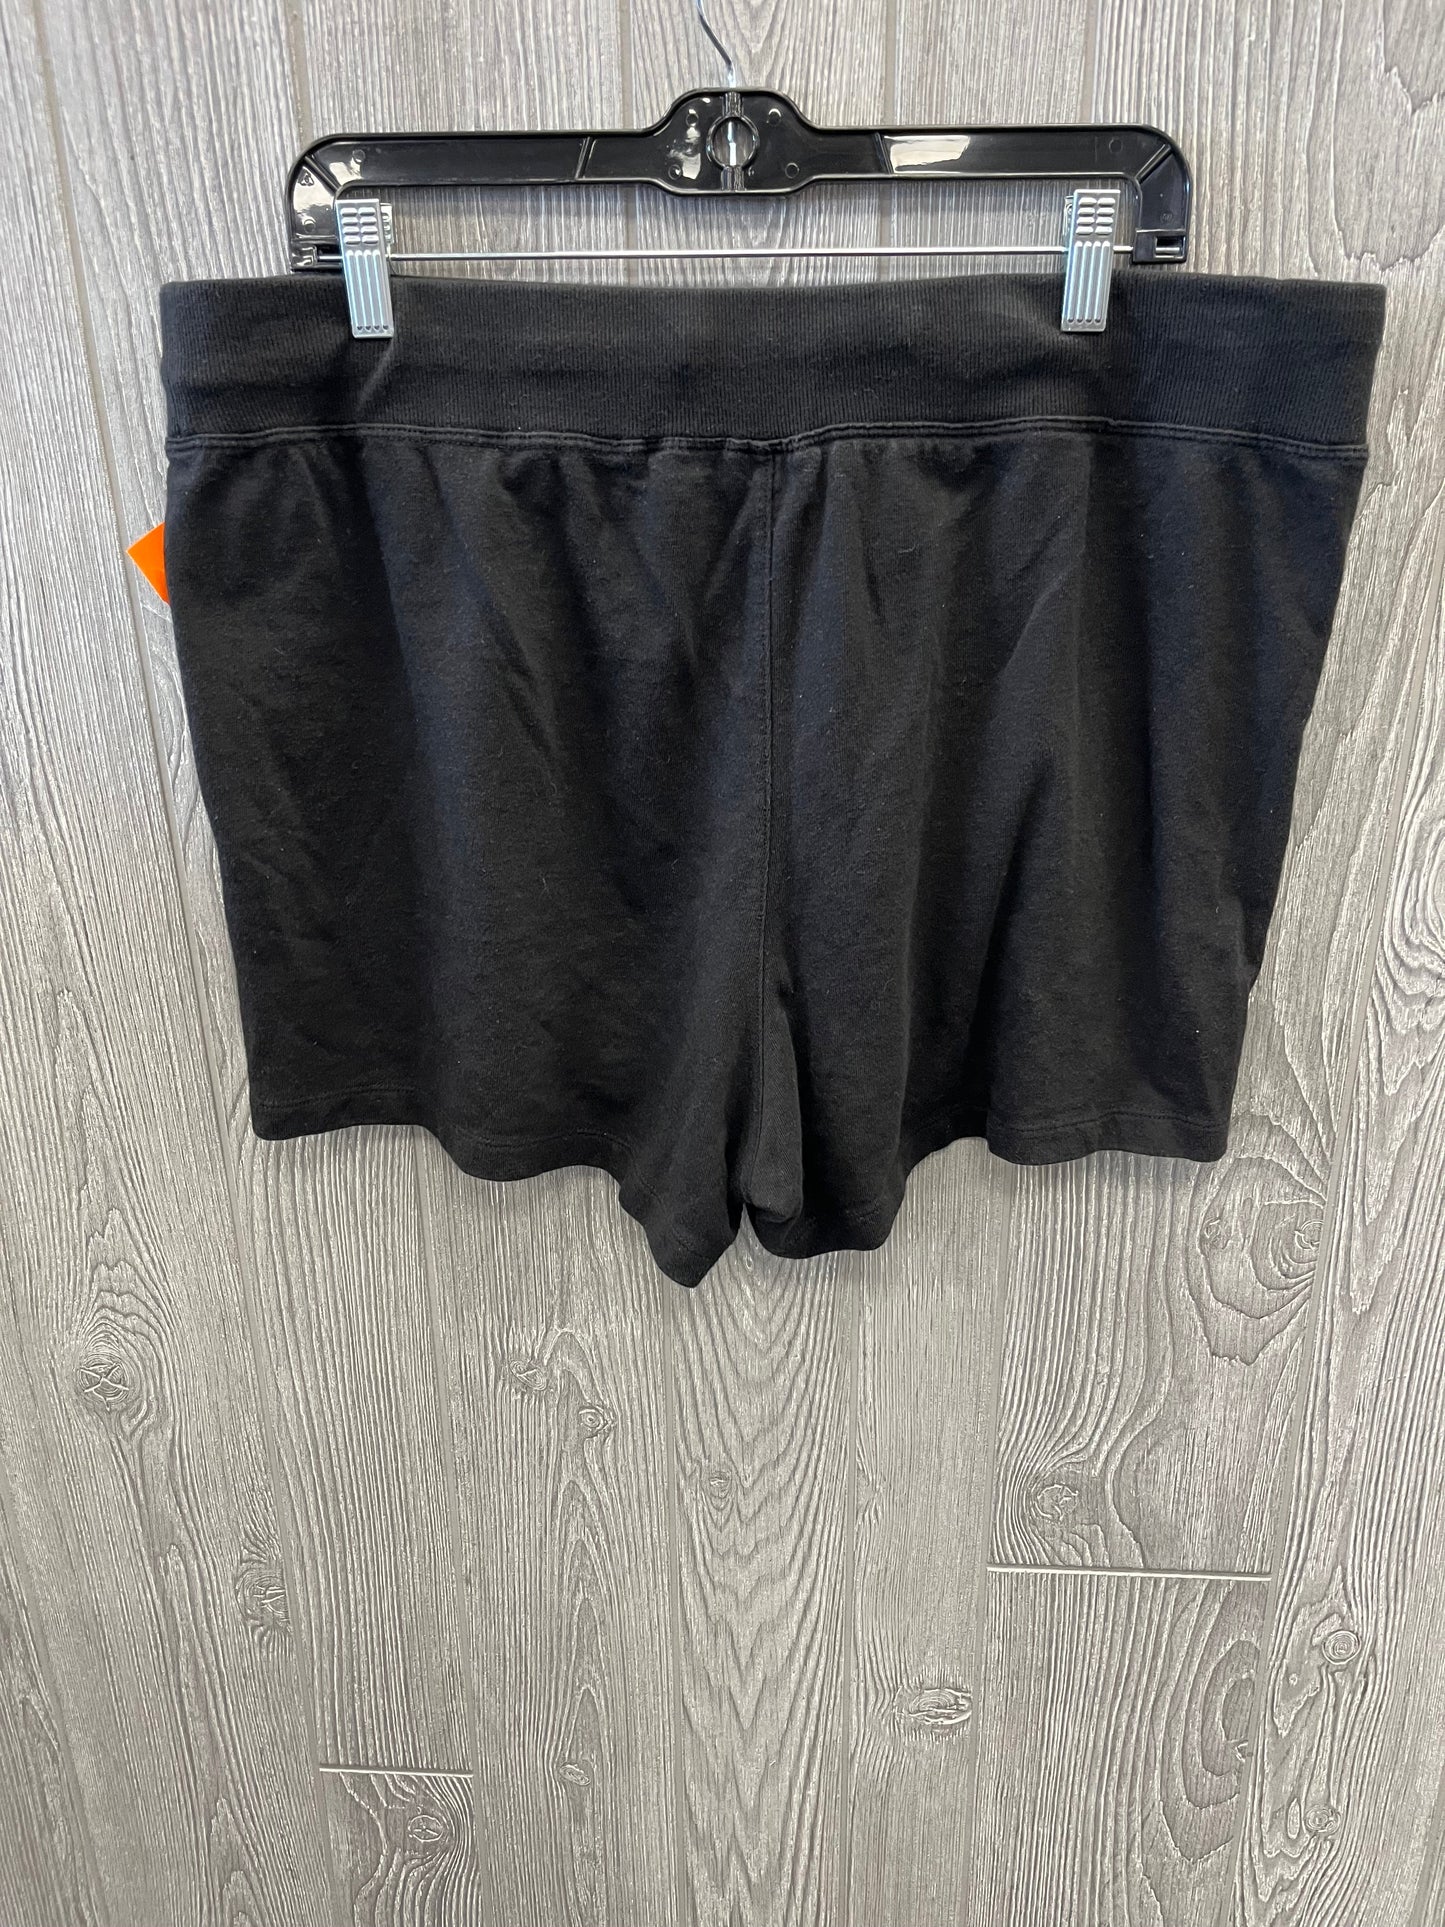 Athletic Shorts By Terra & Sky  Size: 1x